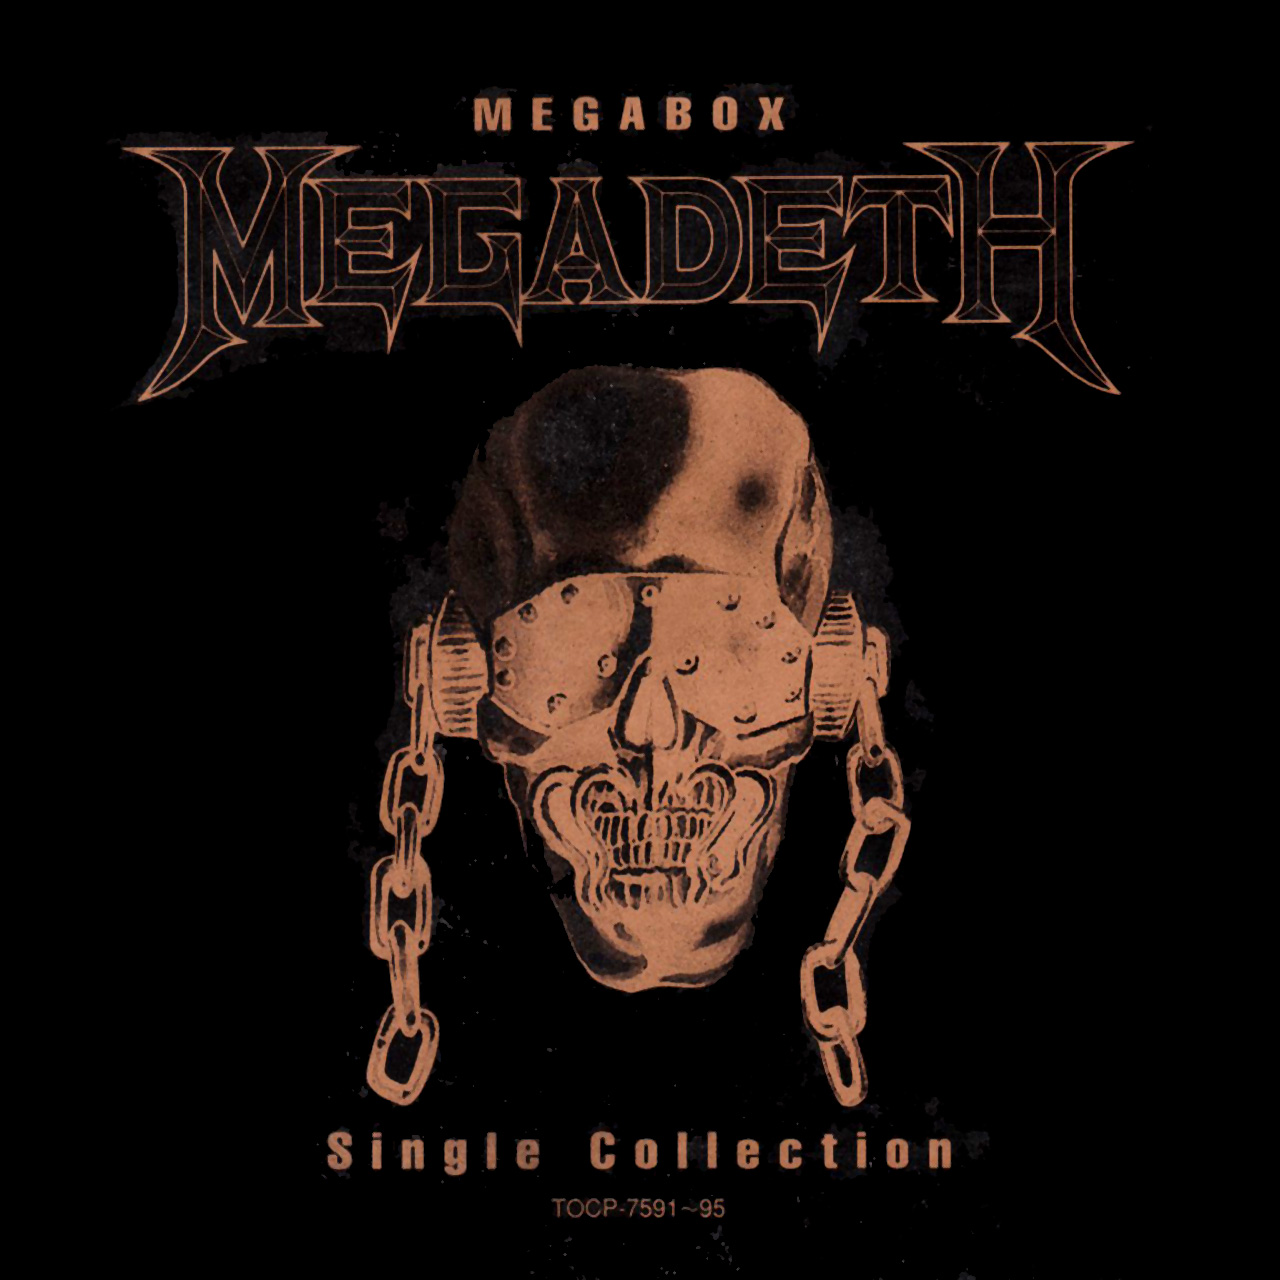 Megabox Single Collection Cd1 1993 Rock Megadeth Download Rock Music Download Good Mourning Black Friday Live Megabox Single Collection Cd1 Failed reading seed file /data/data/com.payu.example/app_webview/variations_seed_new in this link mention to point at the time of sending a payment request, i am being notified that some error. iomoio